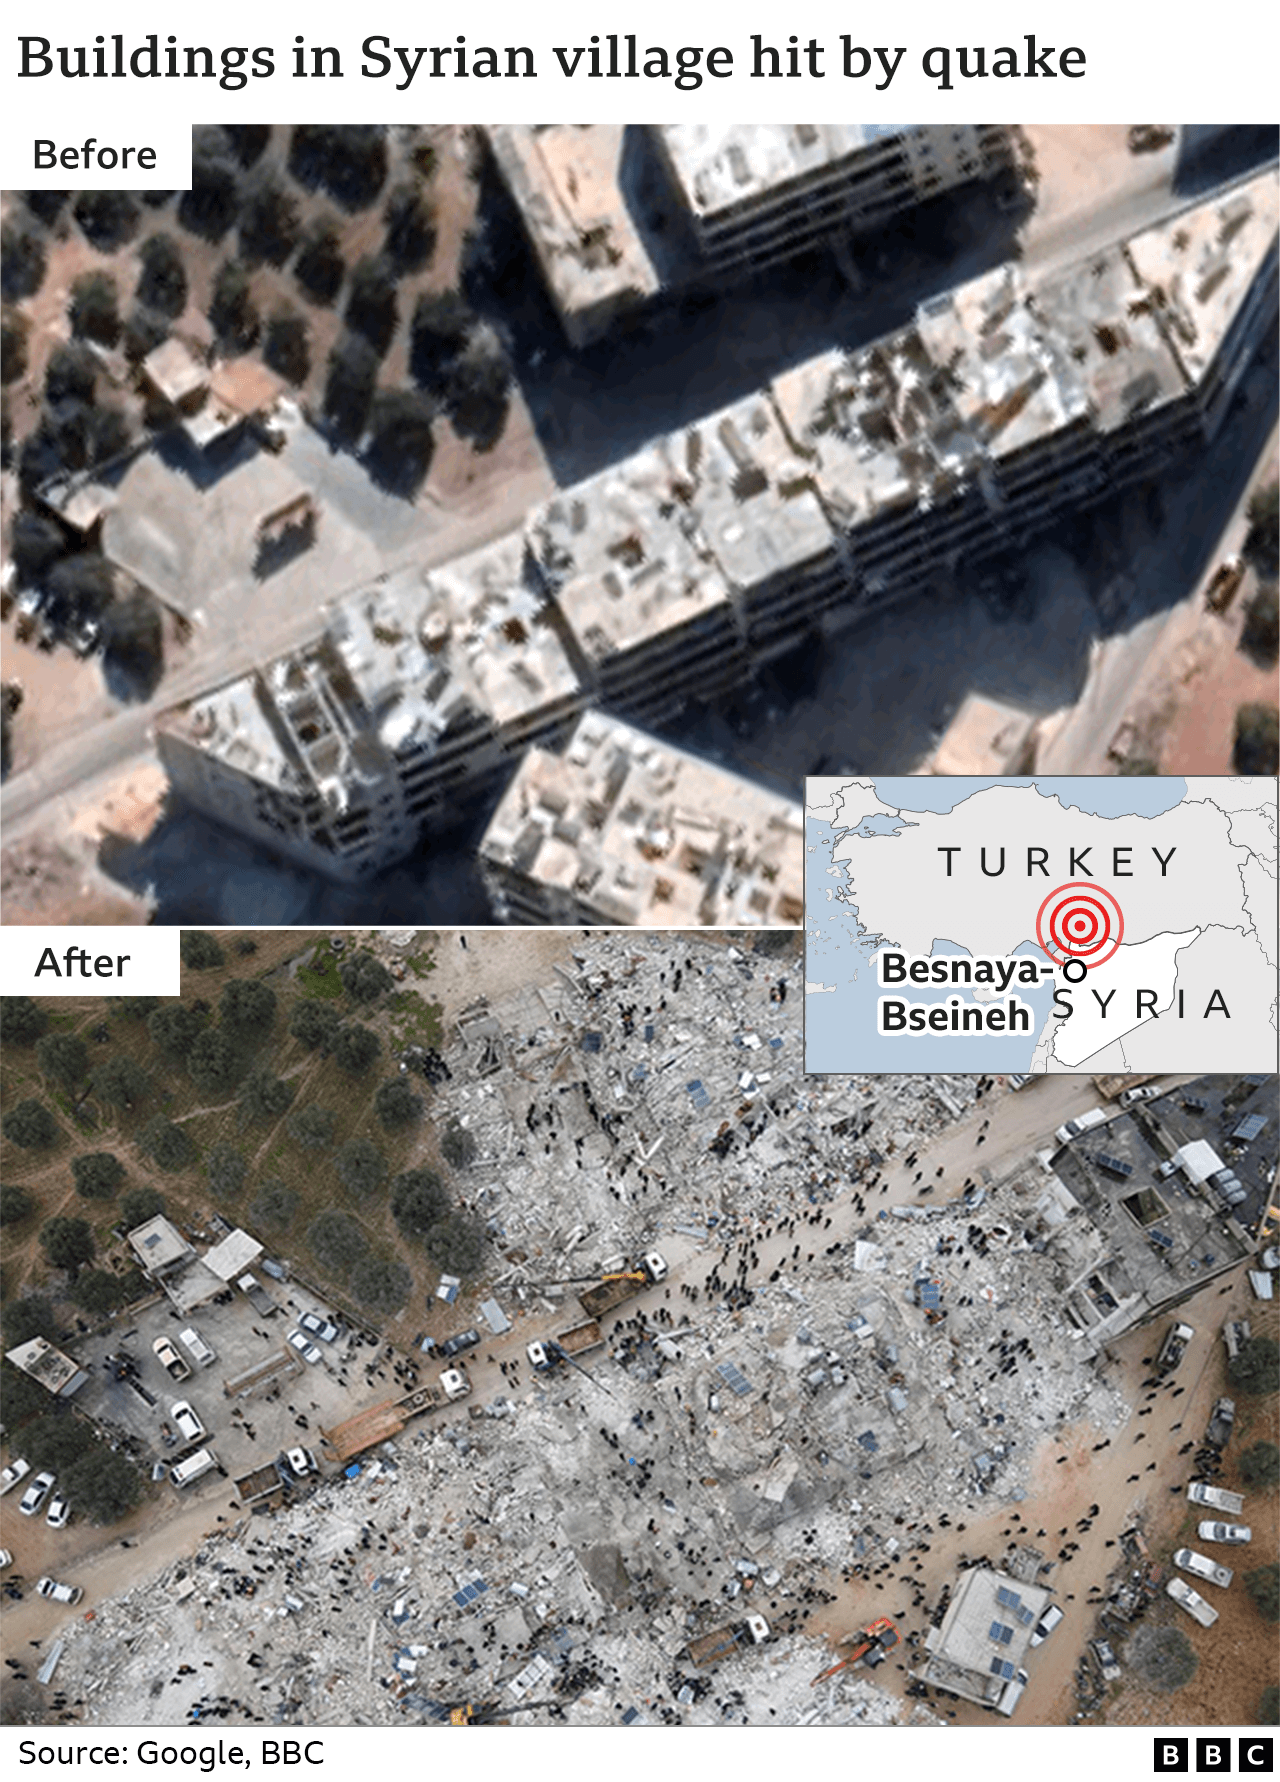 Before and after images show destruction in a village in Syria as a result of the quake.